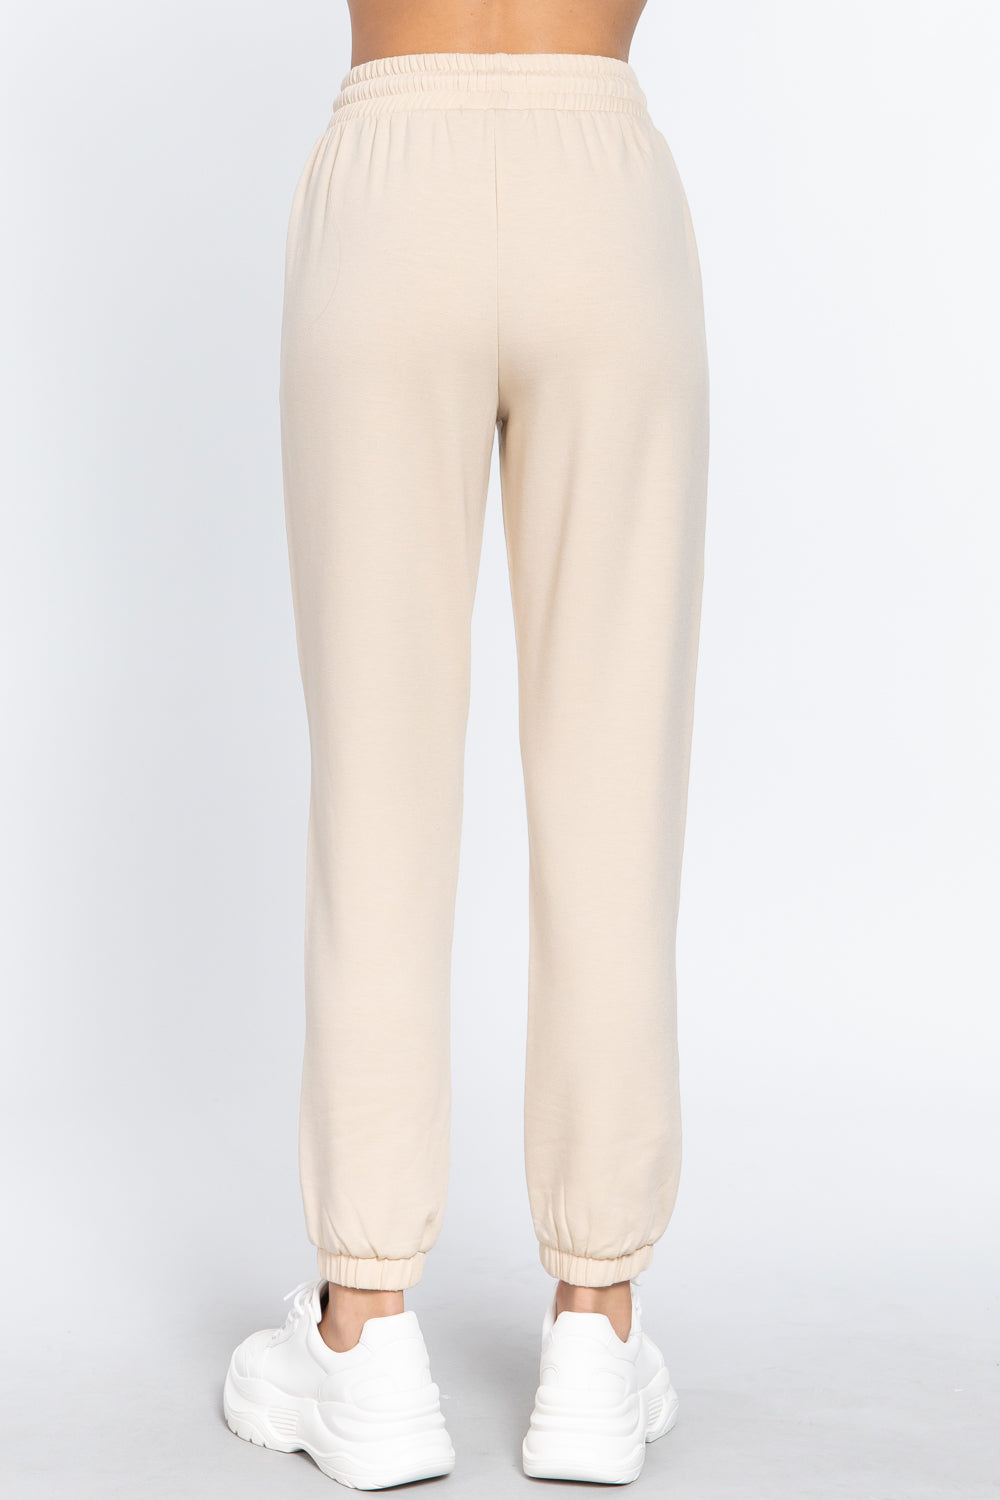 Fleece French Terry Jogger Bottoms jehouze 